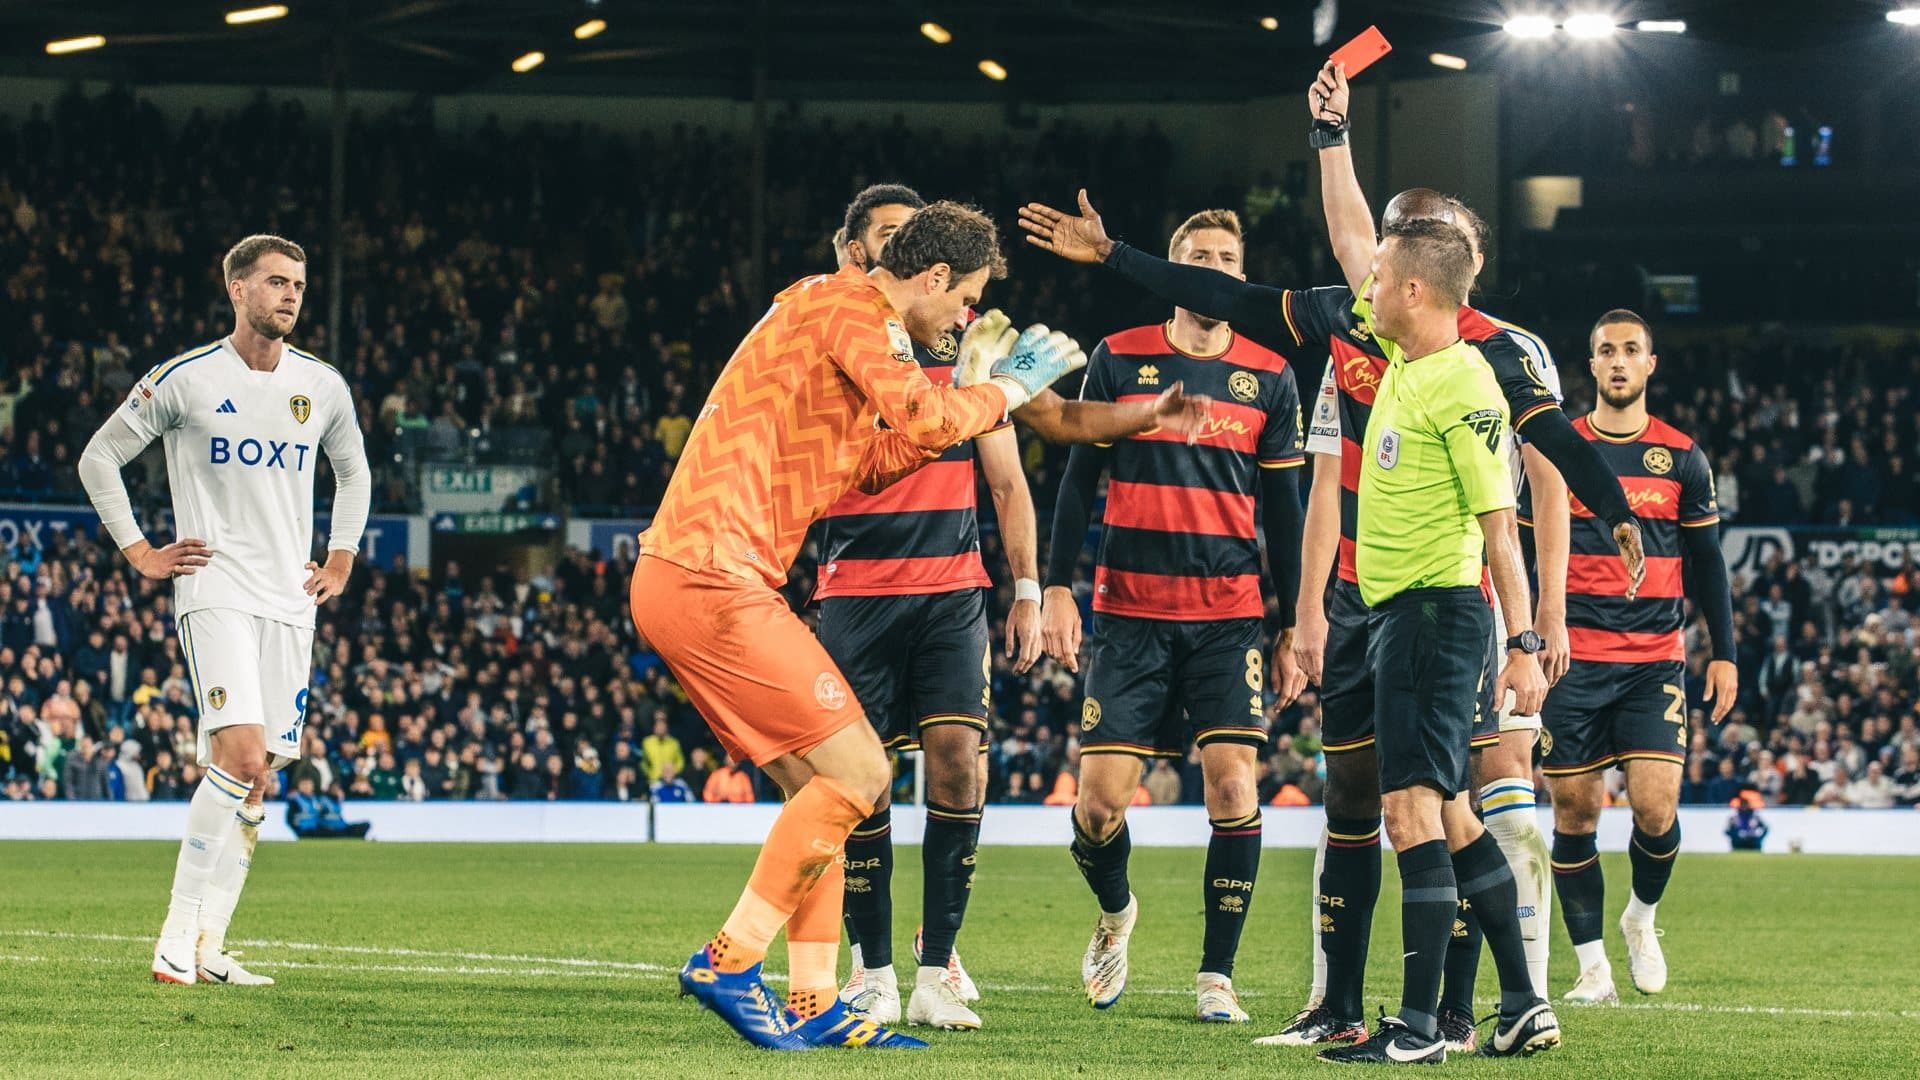 Pat Bamford looks on in no way guiltily as QPR players crowd the ref who is showing Begovic a red card that, again, was in no way Bamford's fault, you can tell by how honest he looks can't you